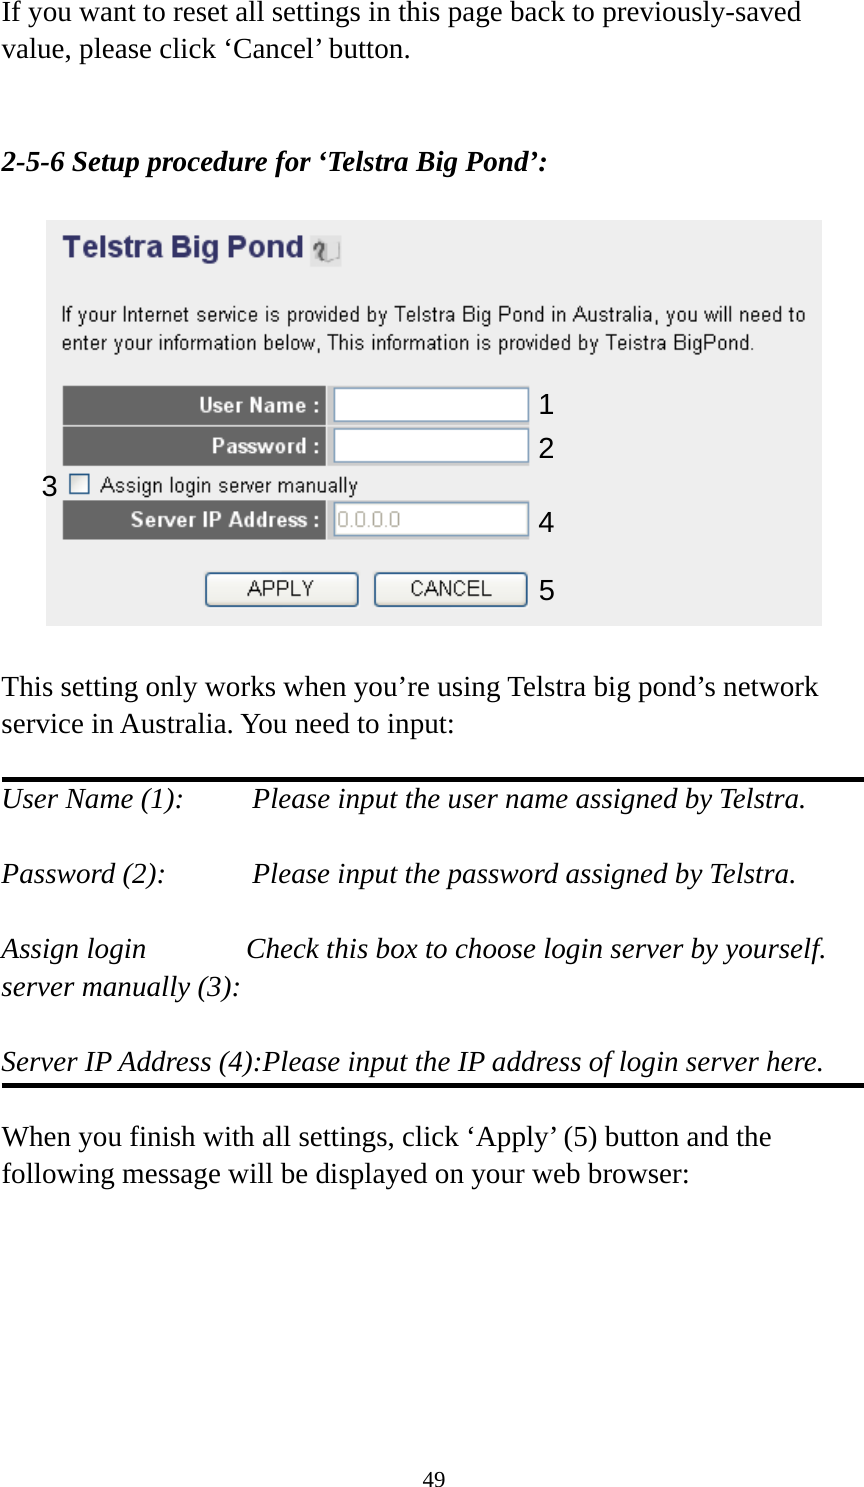 49 If you want to reset all settings in this page back to previously-saved value, please click ‘Cancel’ button.   2-5-6 Setup procedure for ‘Telstra Big Pond’:    This setting only works when you’re using Telstra big pond’s network service in Australia. You need to input:  User Name (1):     Please input the user name assigned by Telstra.  Password (2):      Please input the password assigned by Telstra.  Assign login          Check this box to choose login server by yourself. server manually (3):    Server IP Address (4):Please input the IP address of login server here.  When you finish with all settings, click ‘Apply’ (5) button and the following message will be displayed on your web browser:  123 4 5 